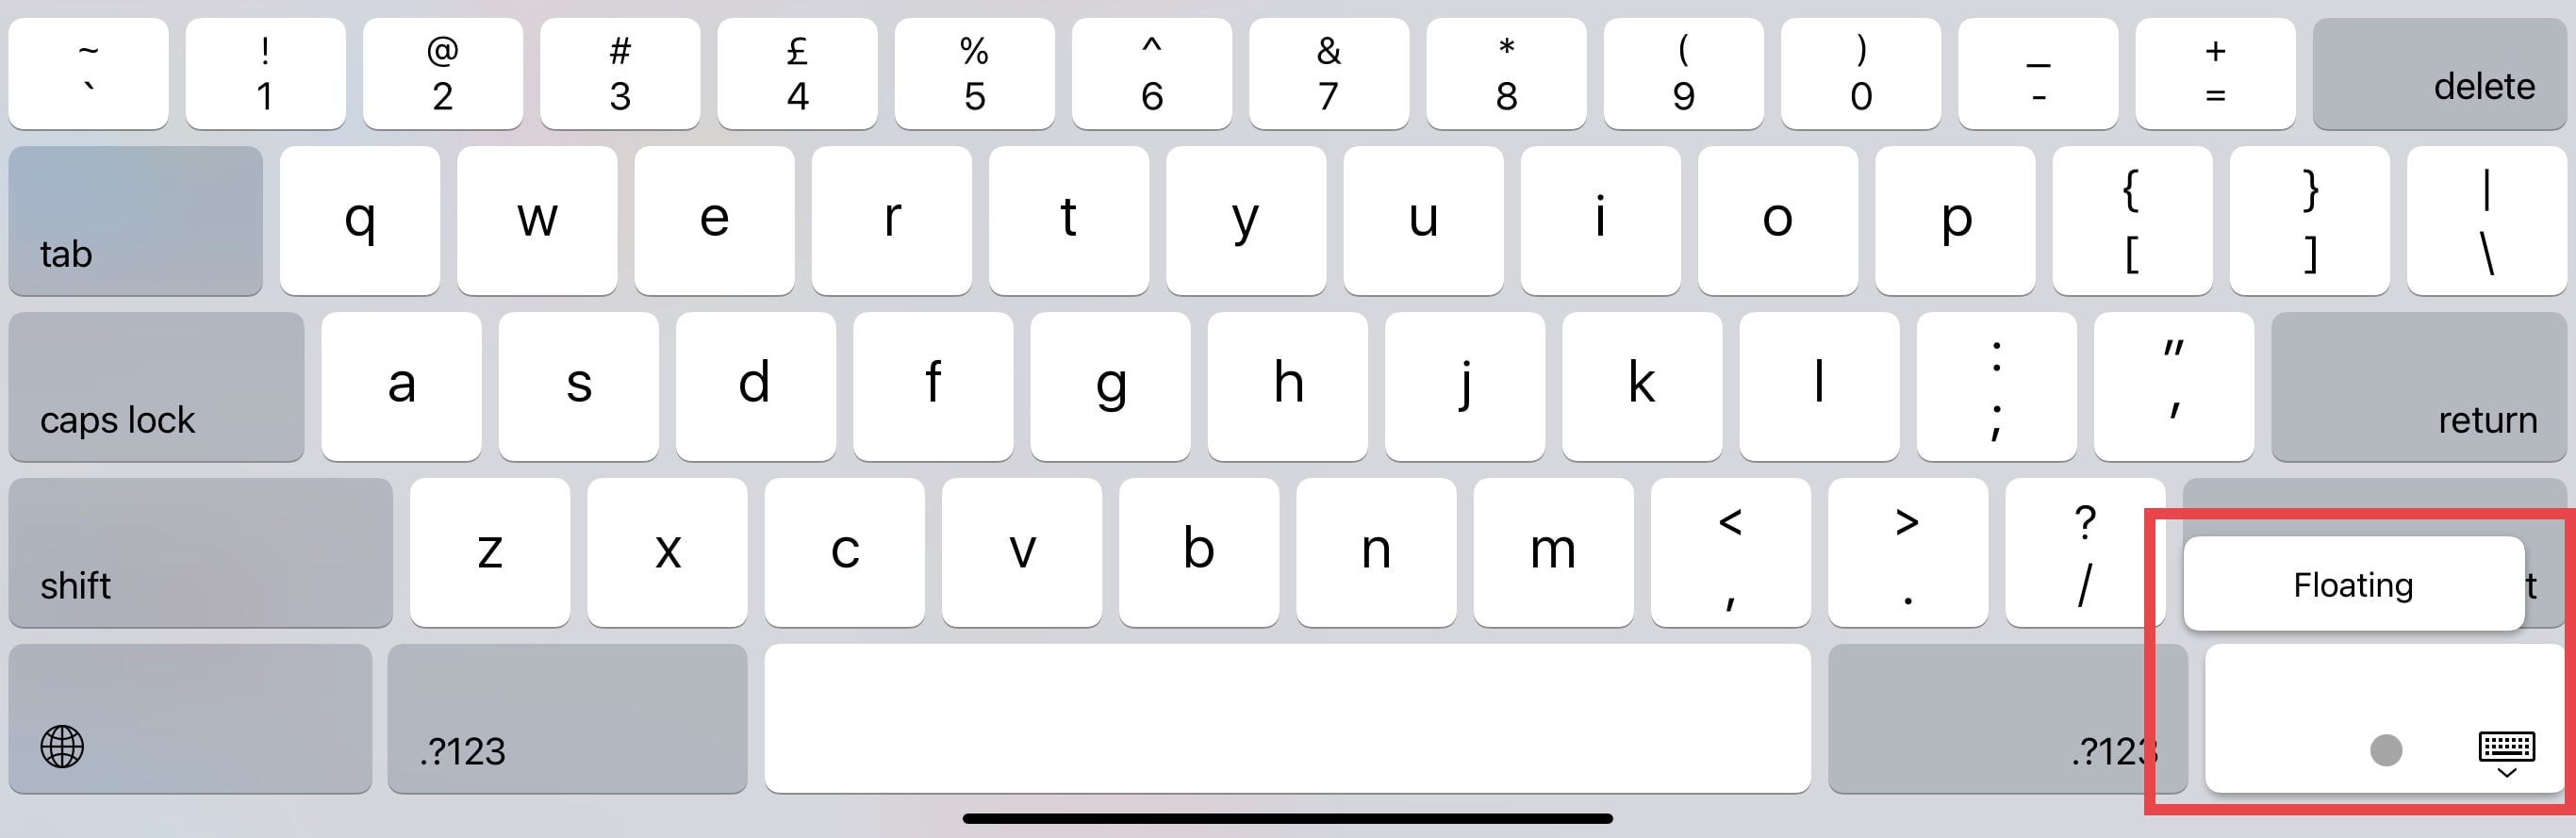 How to enable iPad's floating keyboard: Tap and hold the keyboard button, then select FLOATING